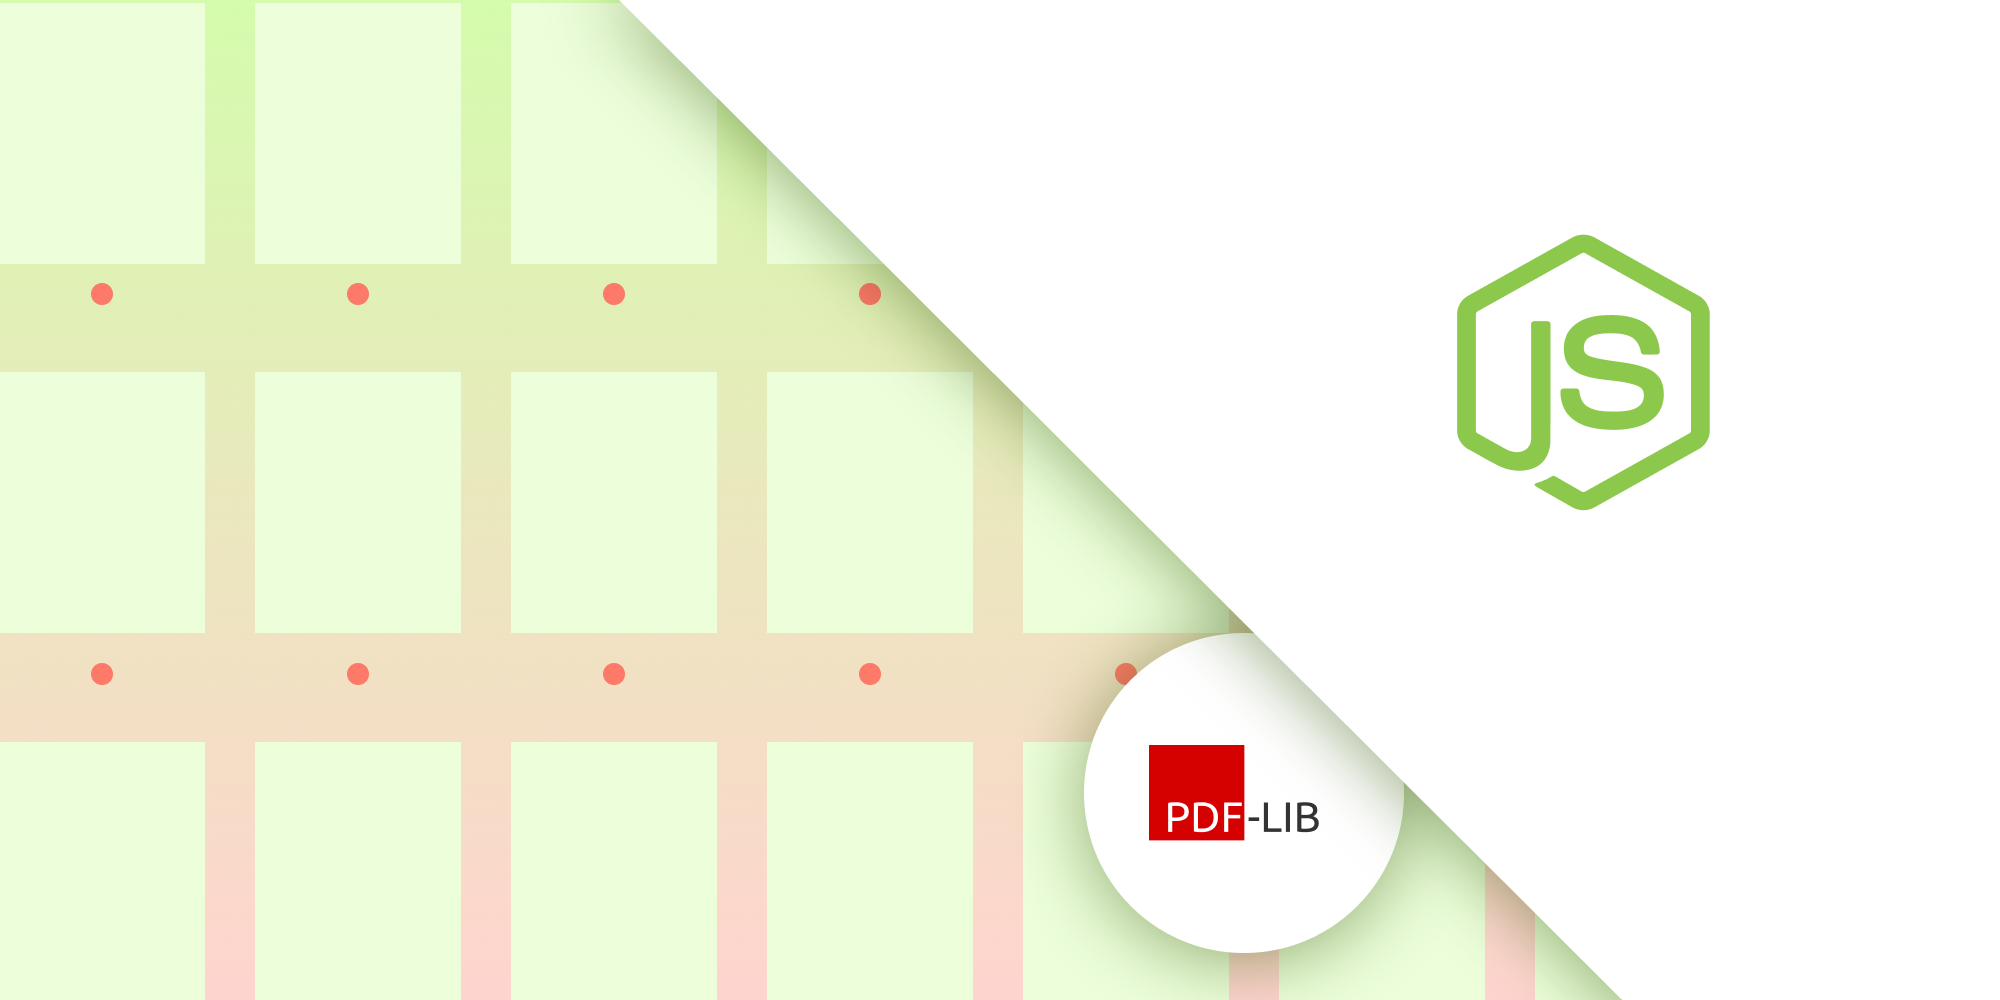 Illustration: How to Build a Node.js PDF Editor with pdf-lib